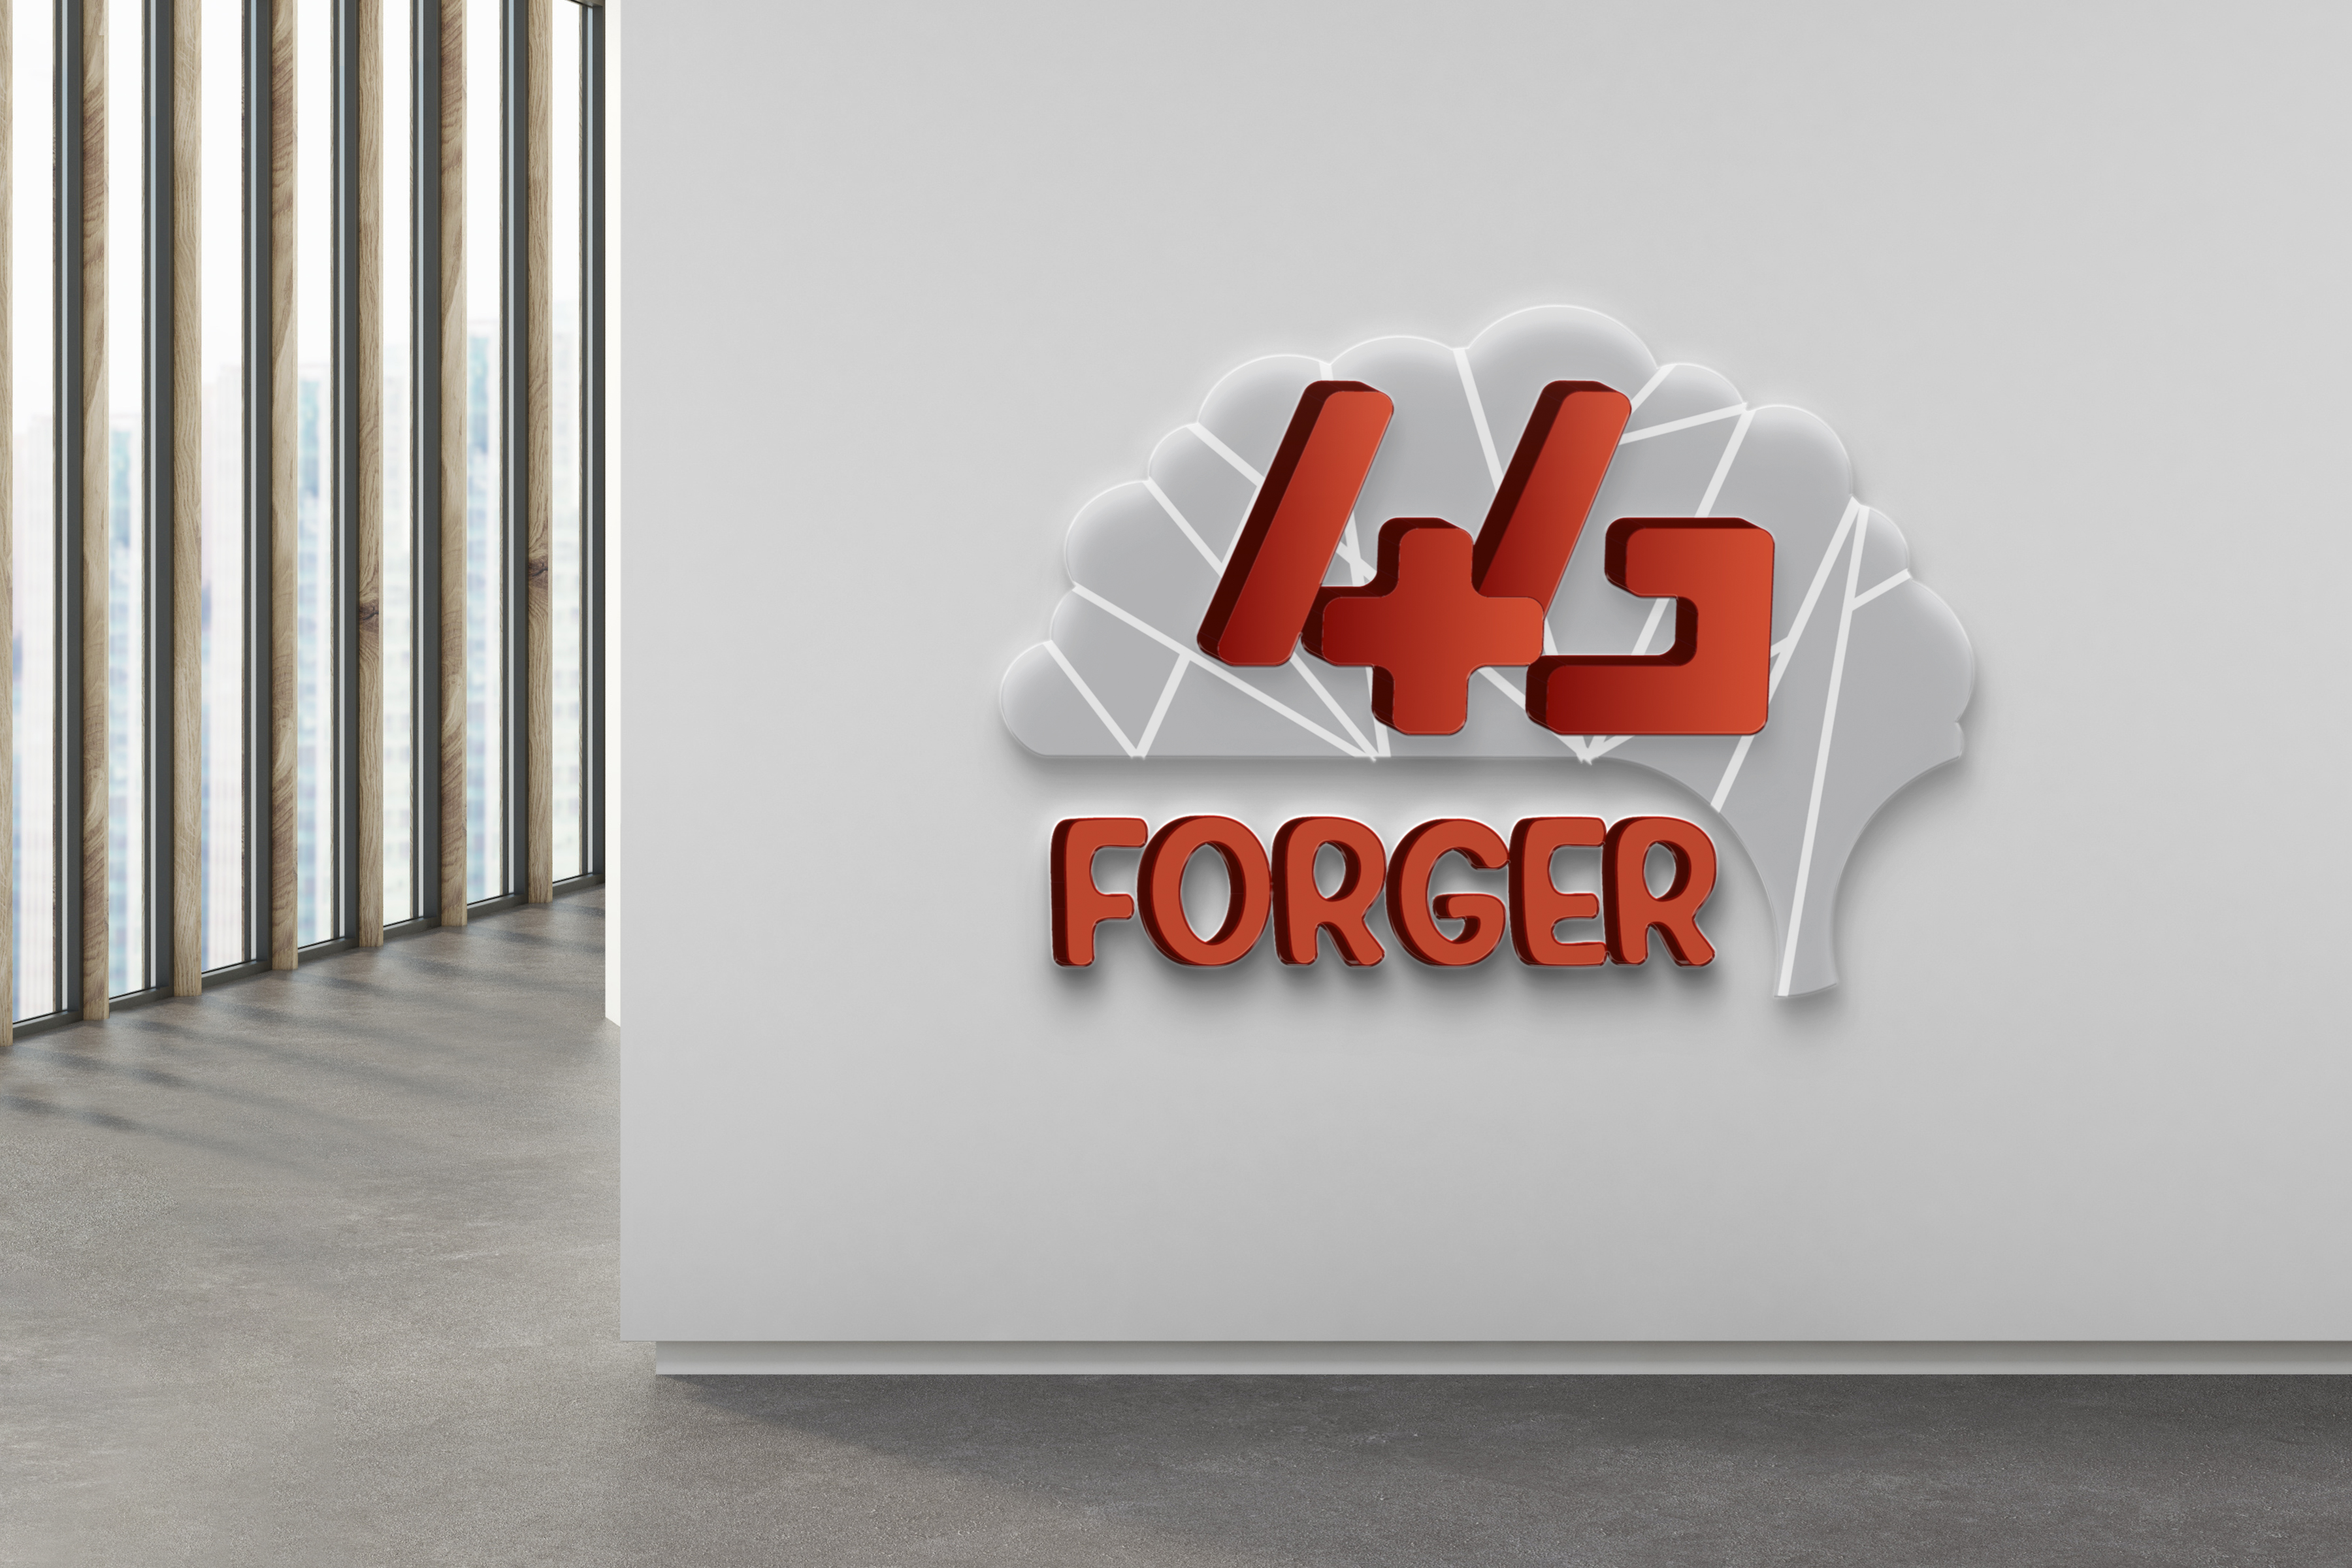 forger